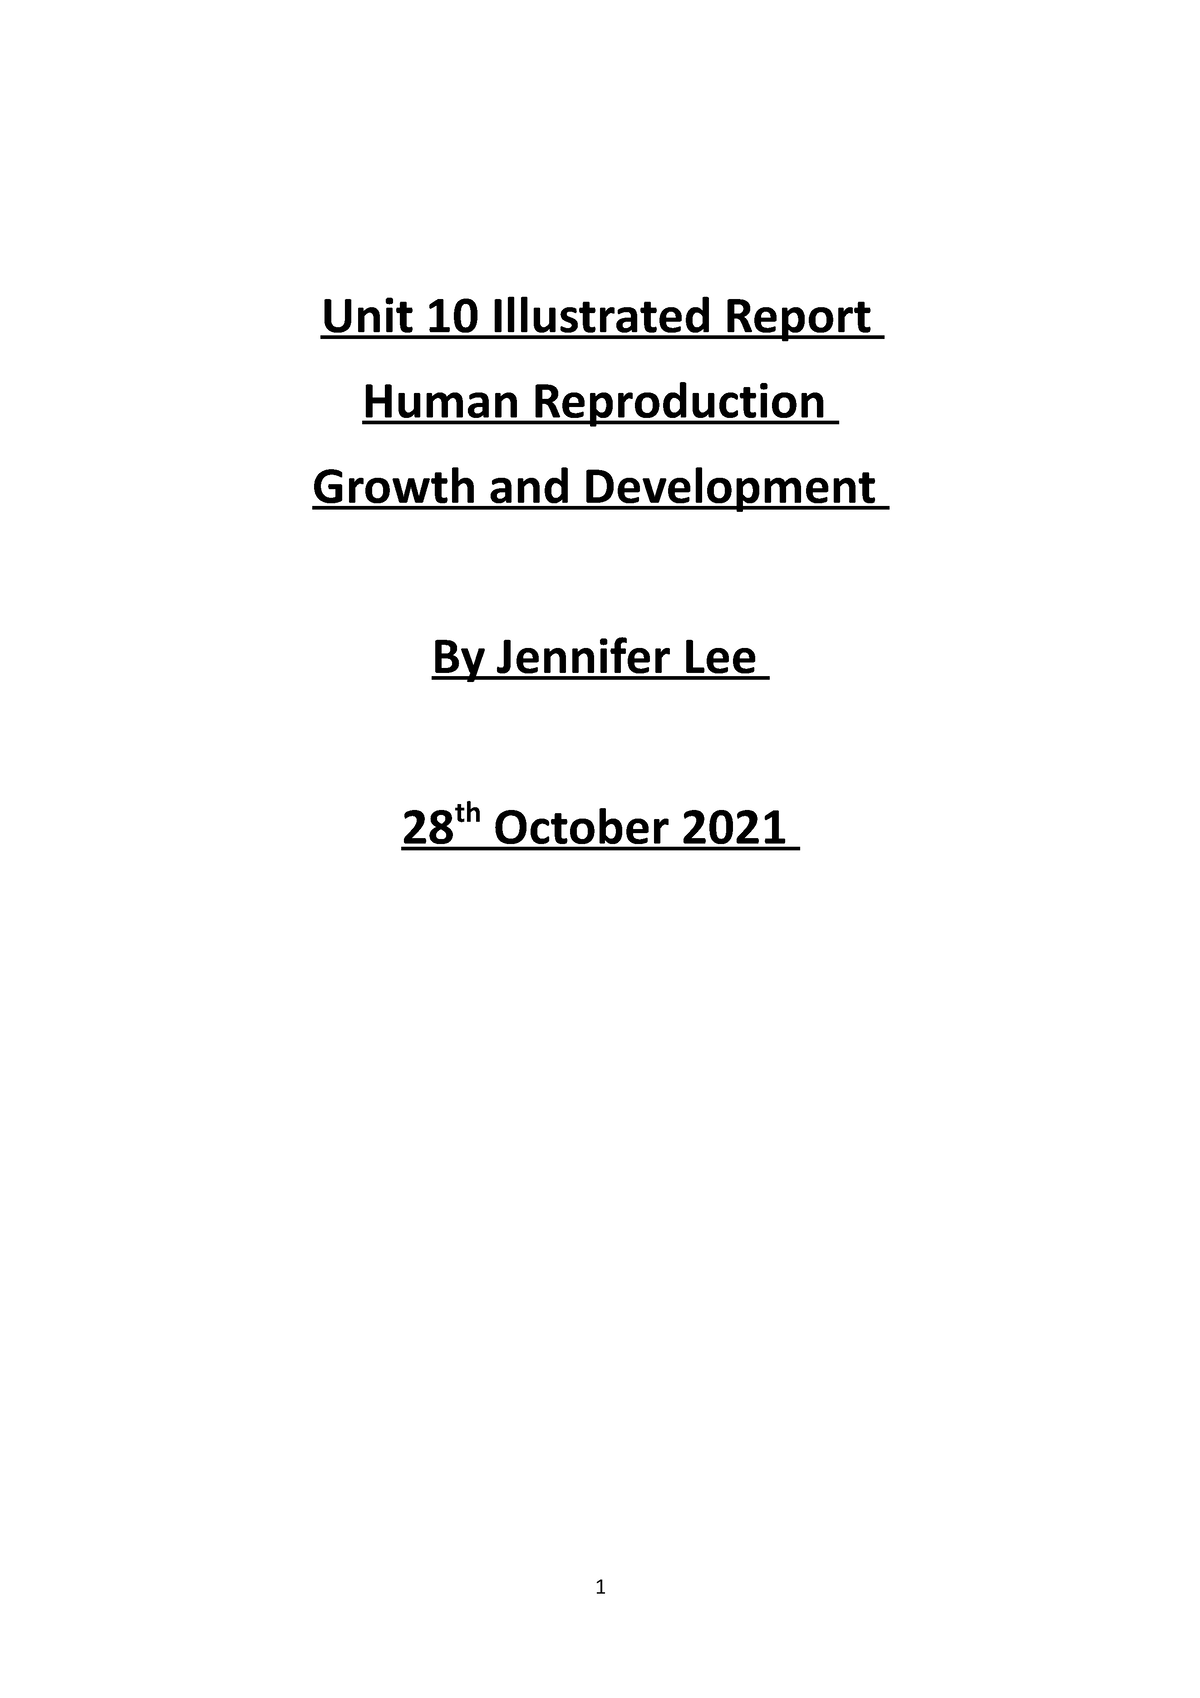 Unit Human Reproduction Growth And Development Unit Illustrated Report Human